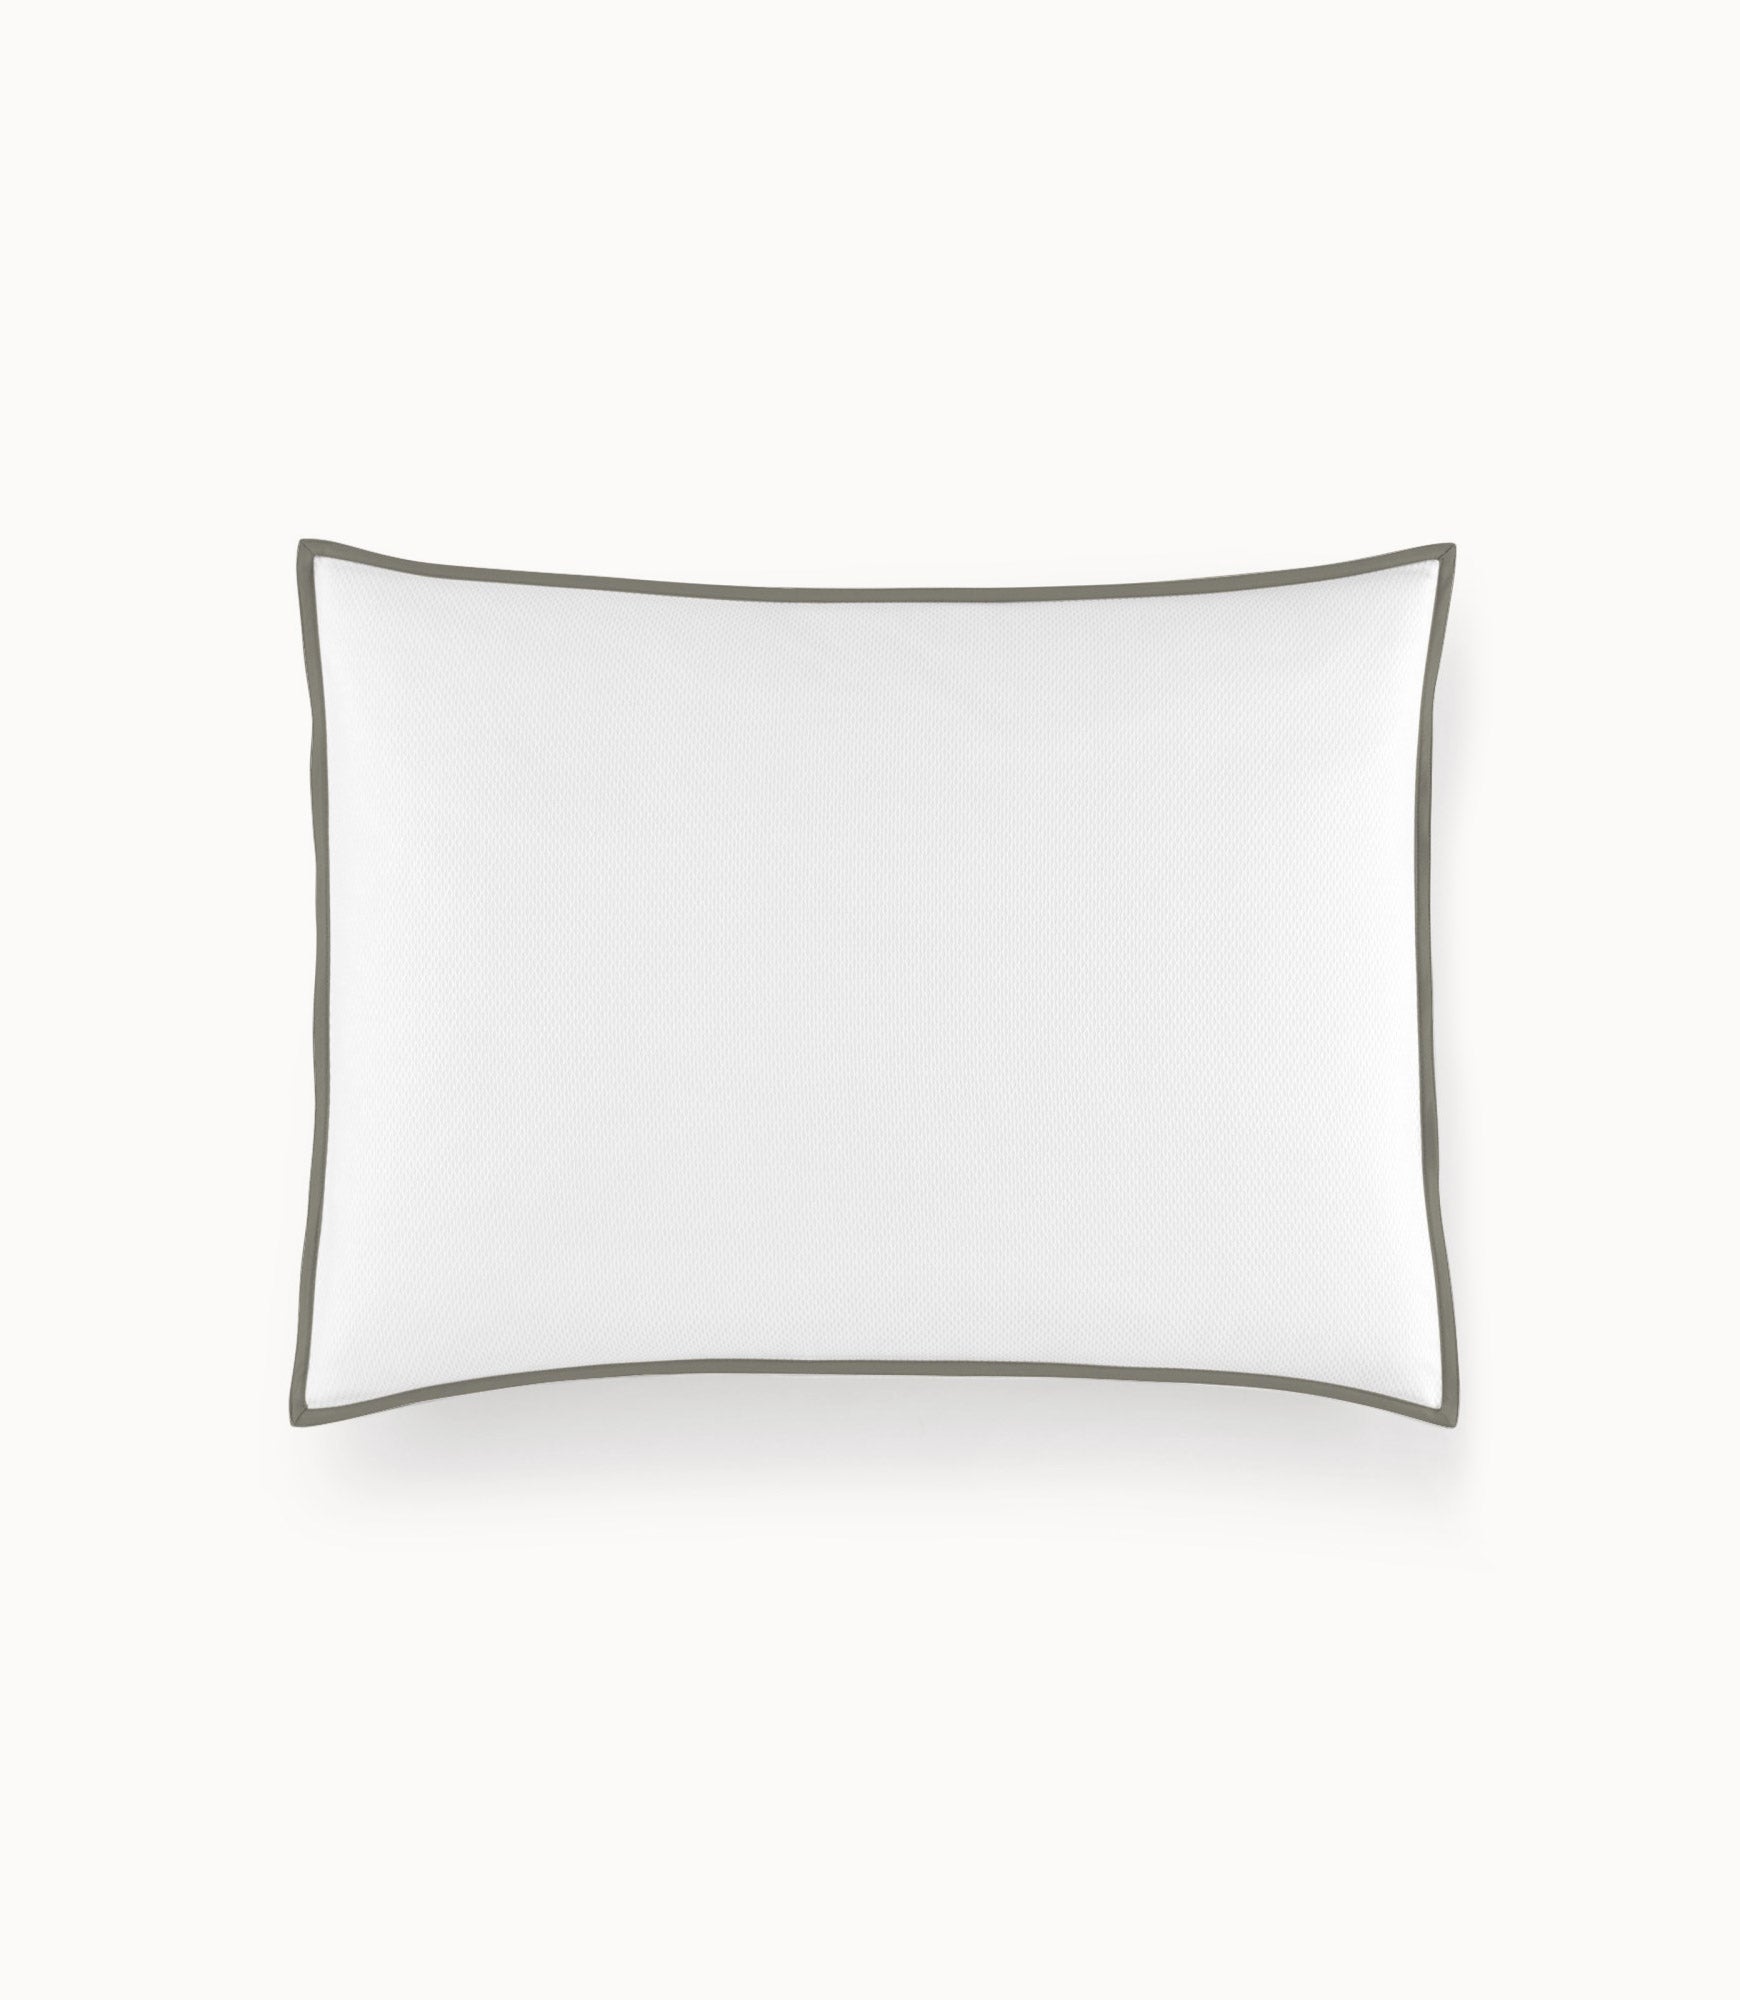 Peacock Alley Pillow Inserts in White | Euro | 100% Cotton